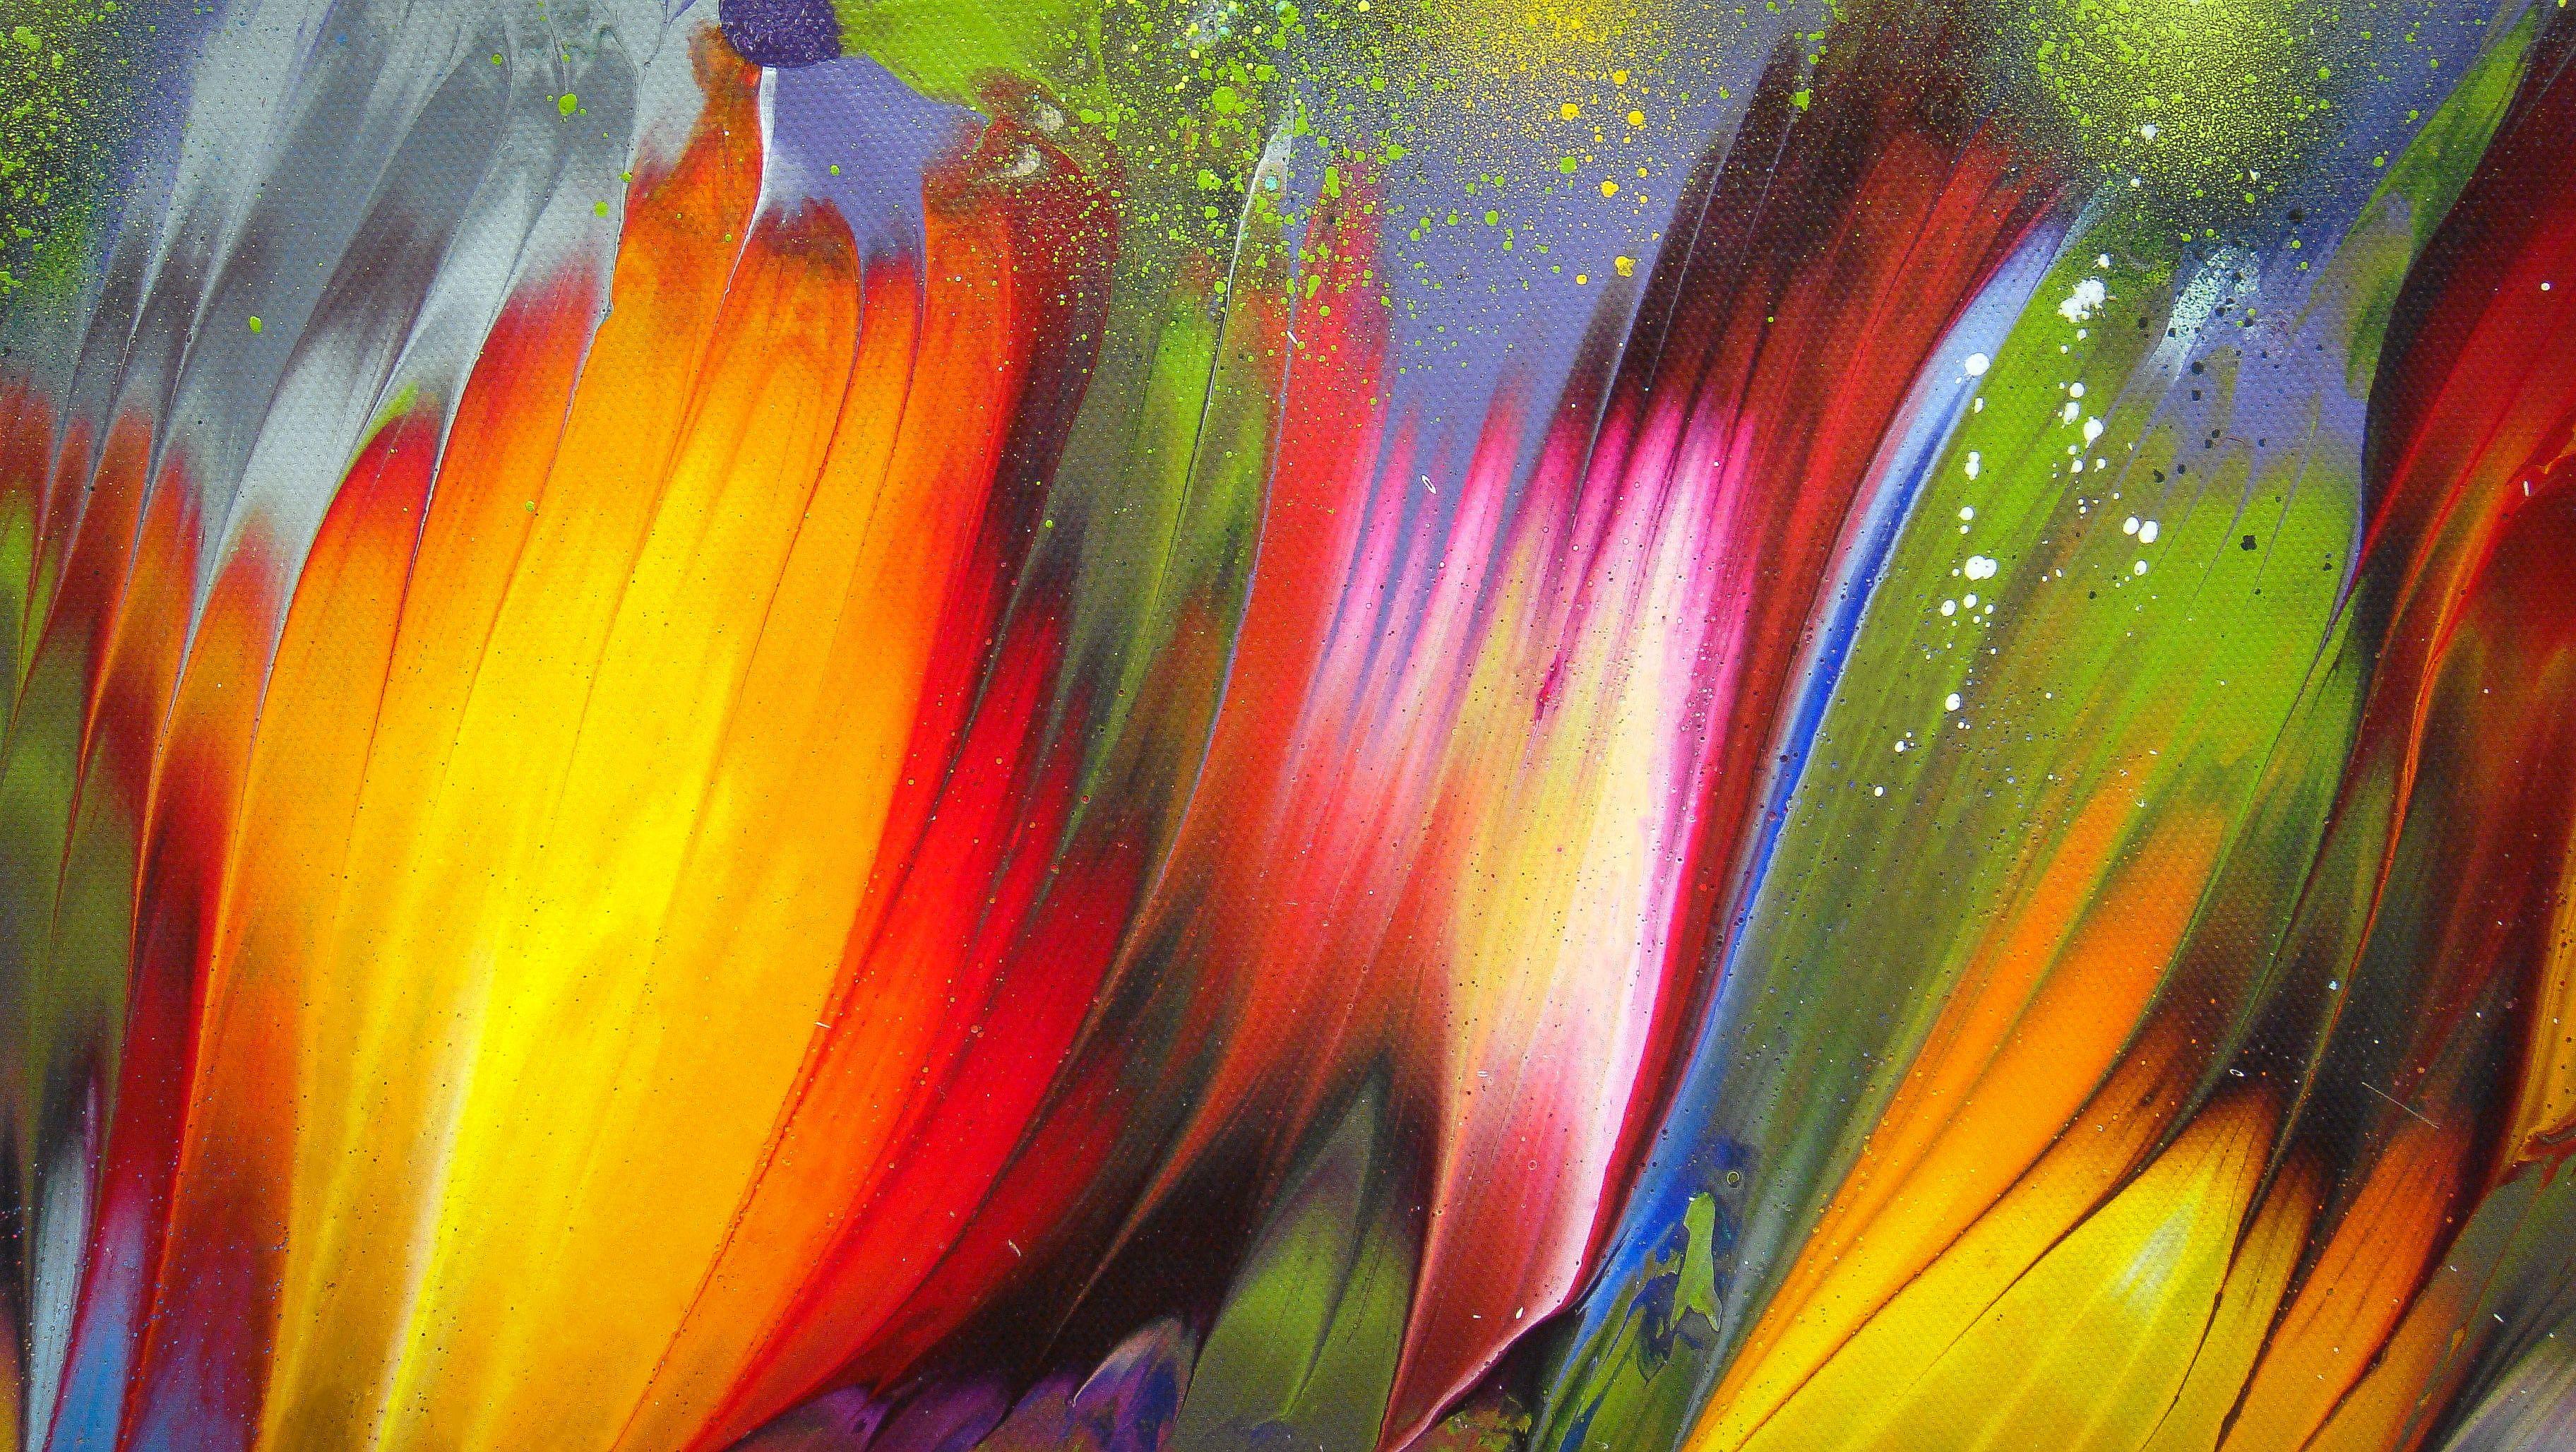 VERY LARGE Abstract painting      -------  Vibrant, colourful and expressive original painting,  Inspired by the beauty of nature, flowers and bright colors. The world we live in is made of colour. Colour is what creates beauty, energy. It evokes